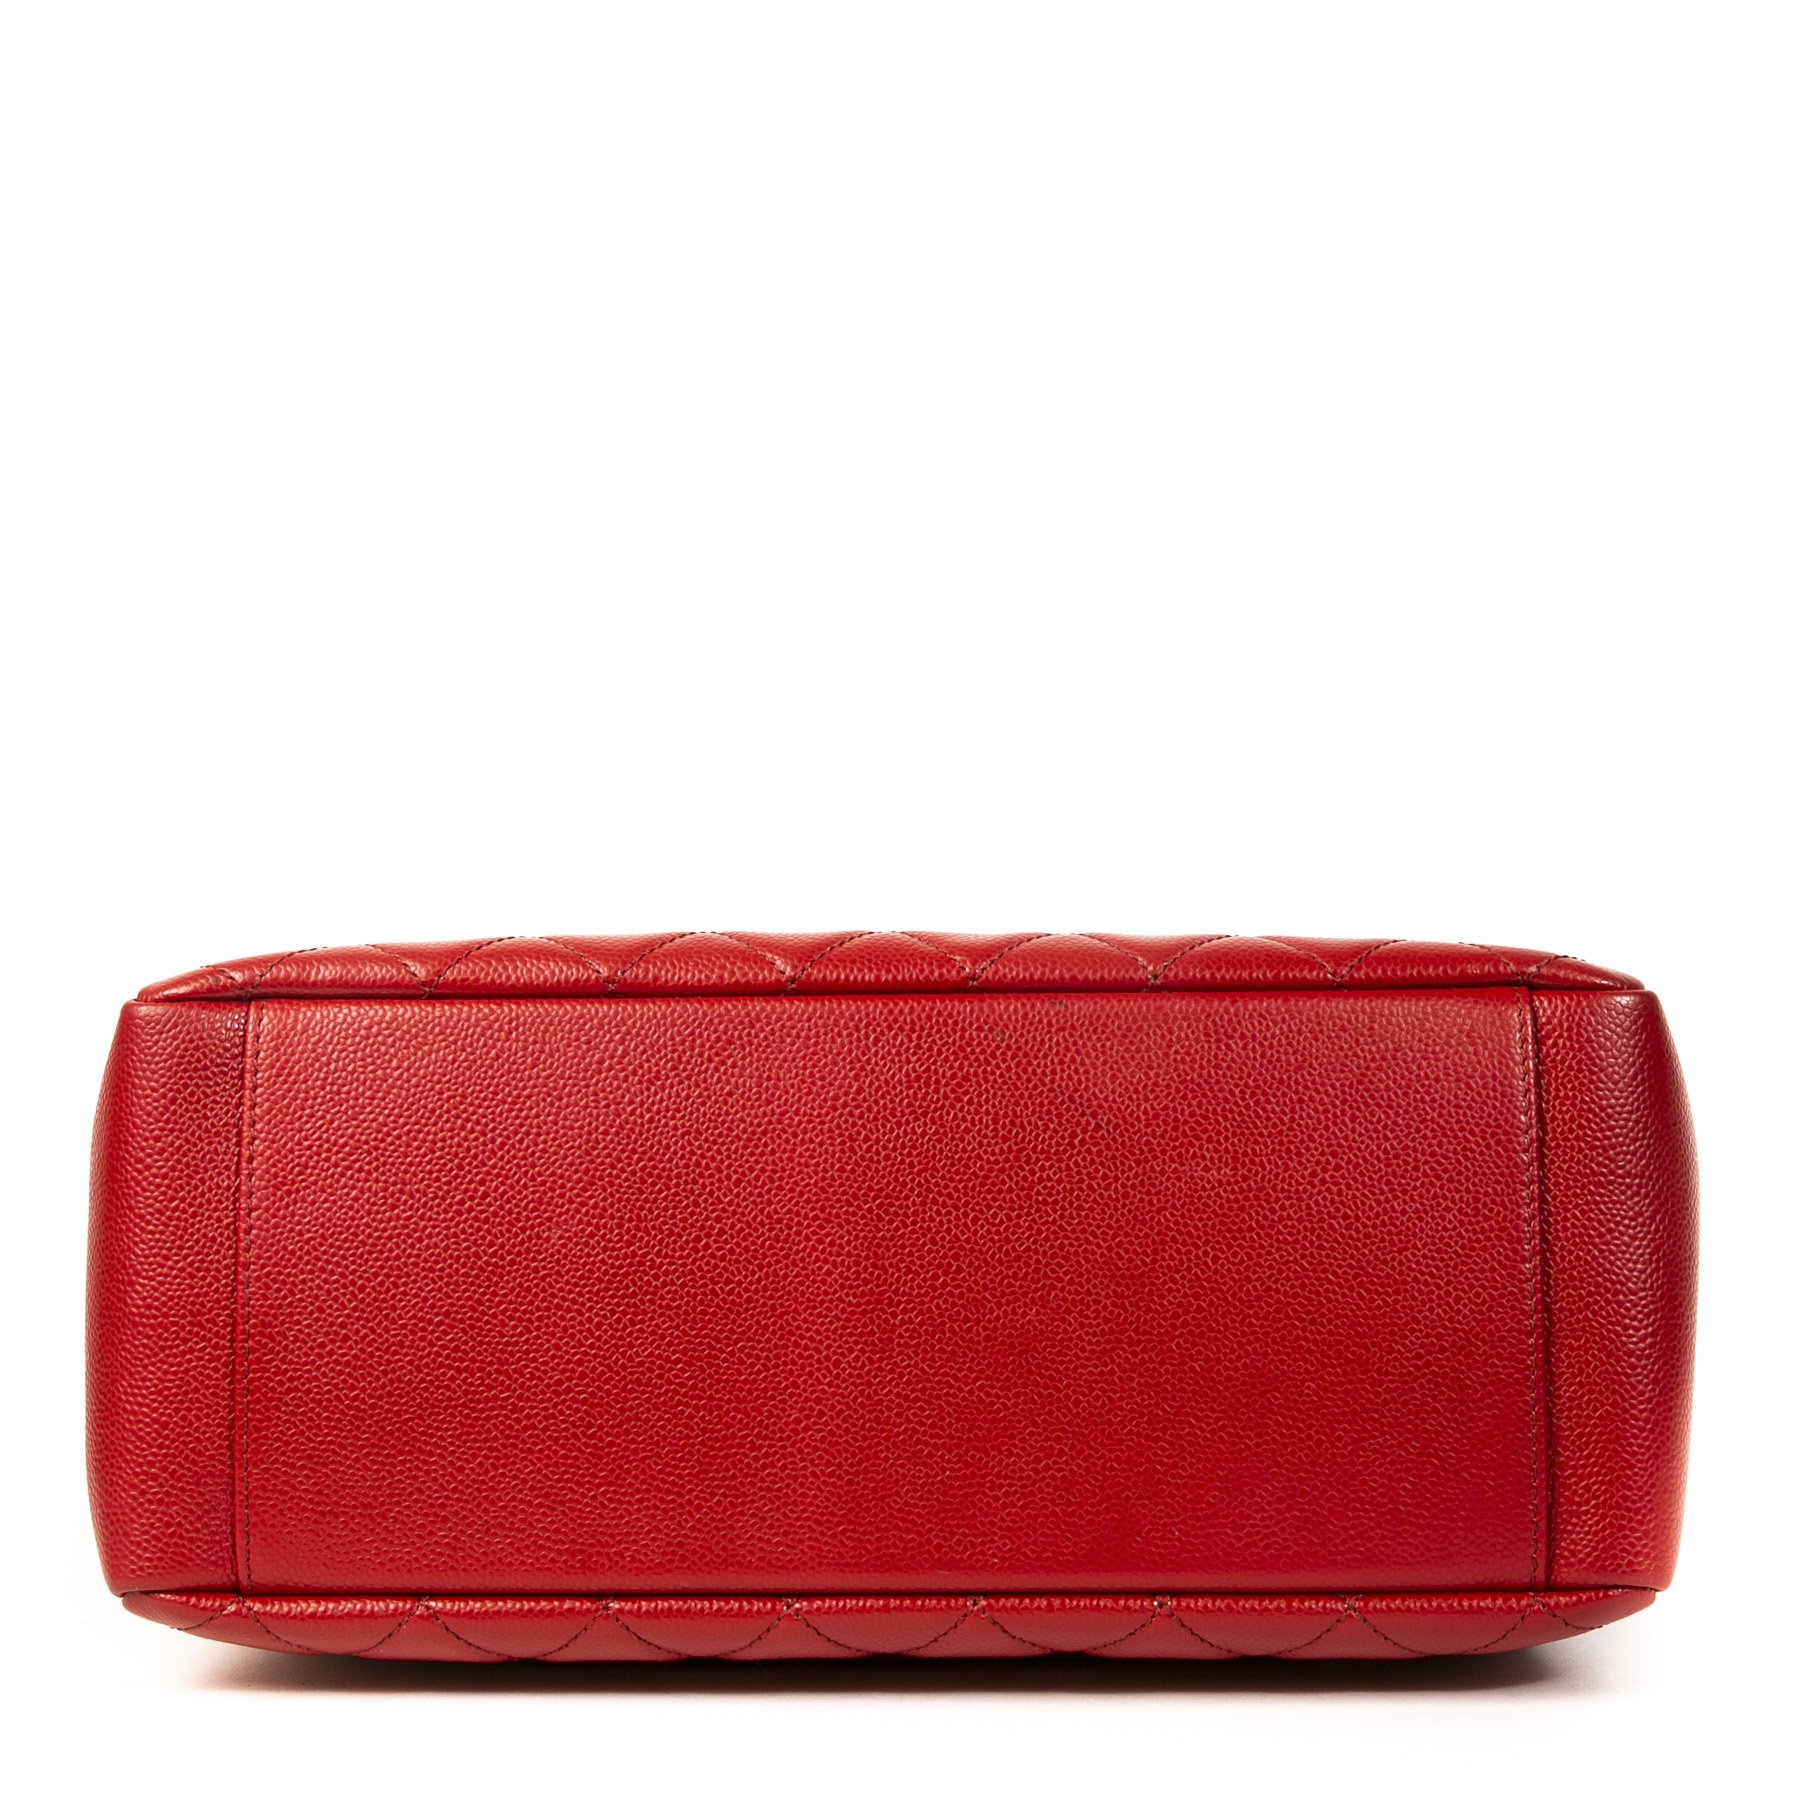 chanel red clutch bag